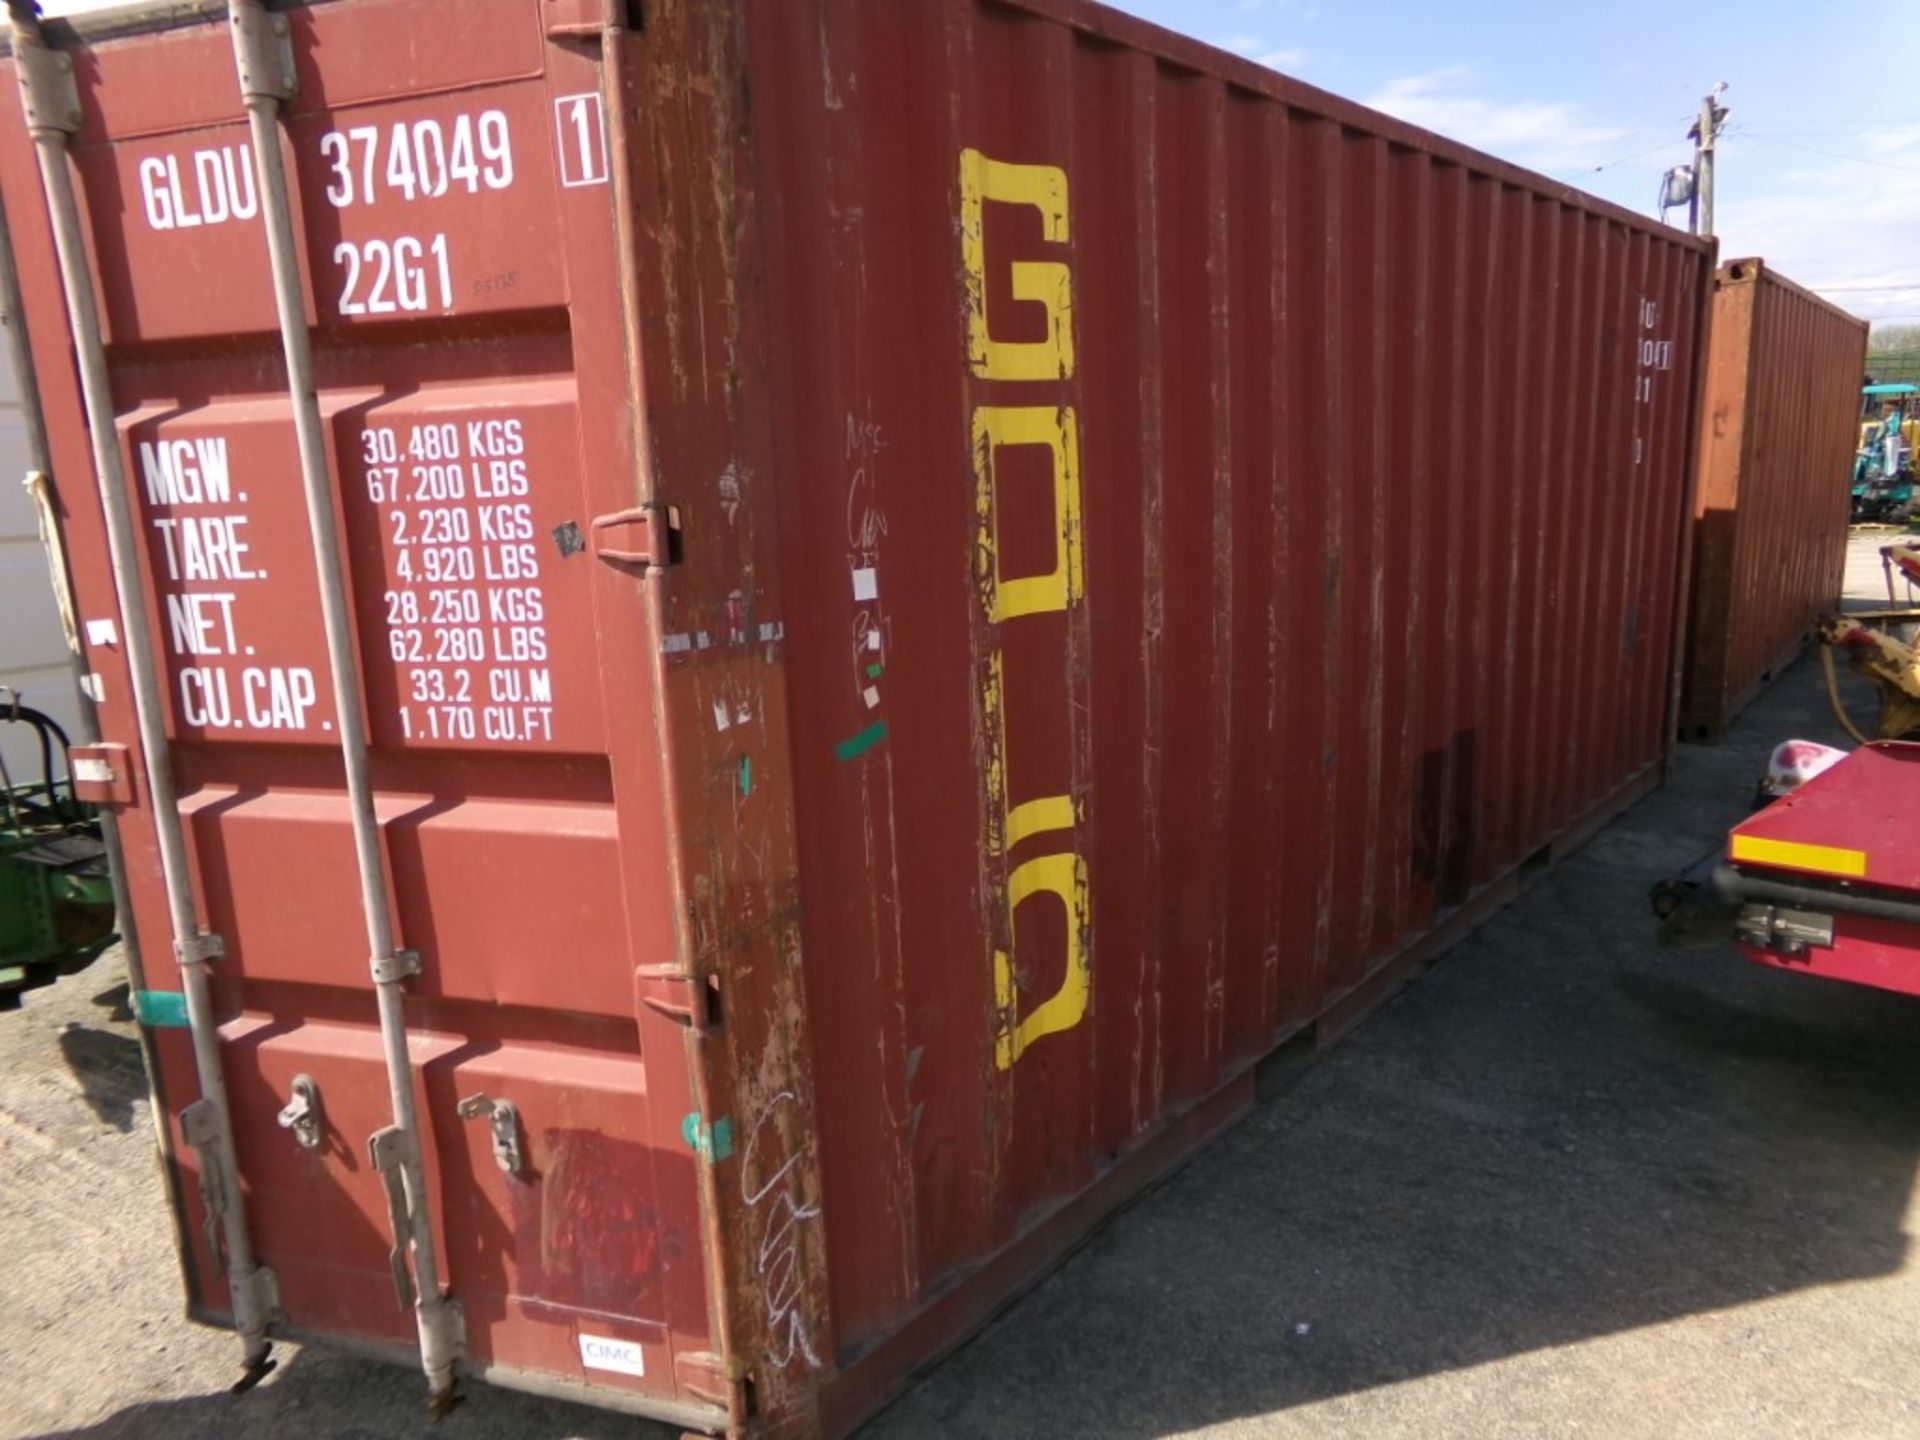 Red 20' Used Storage/Shipping Container, Cont. # GLDU3740491 (5138) - Image 2 of 2